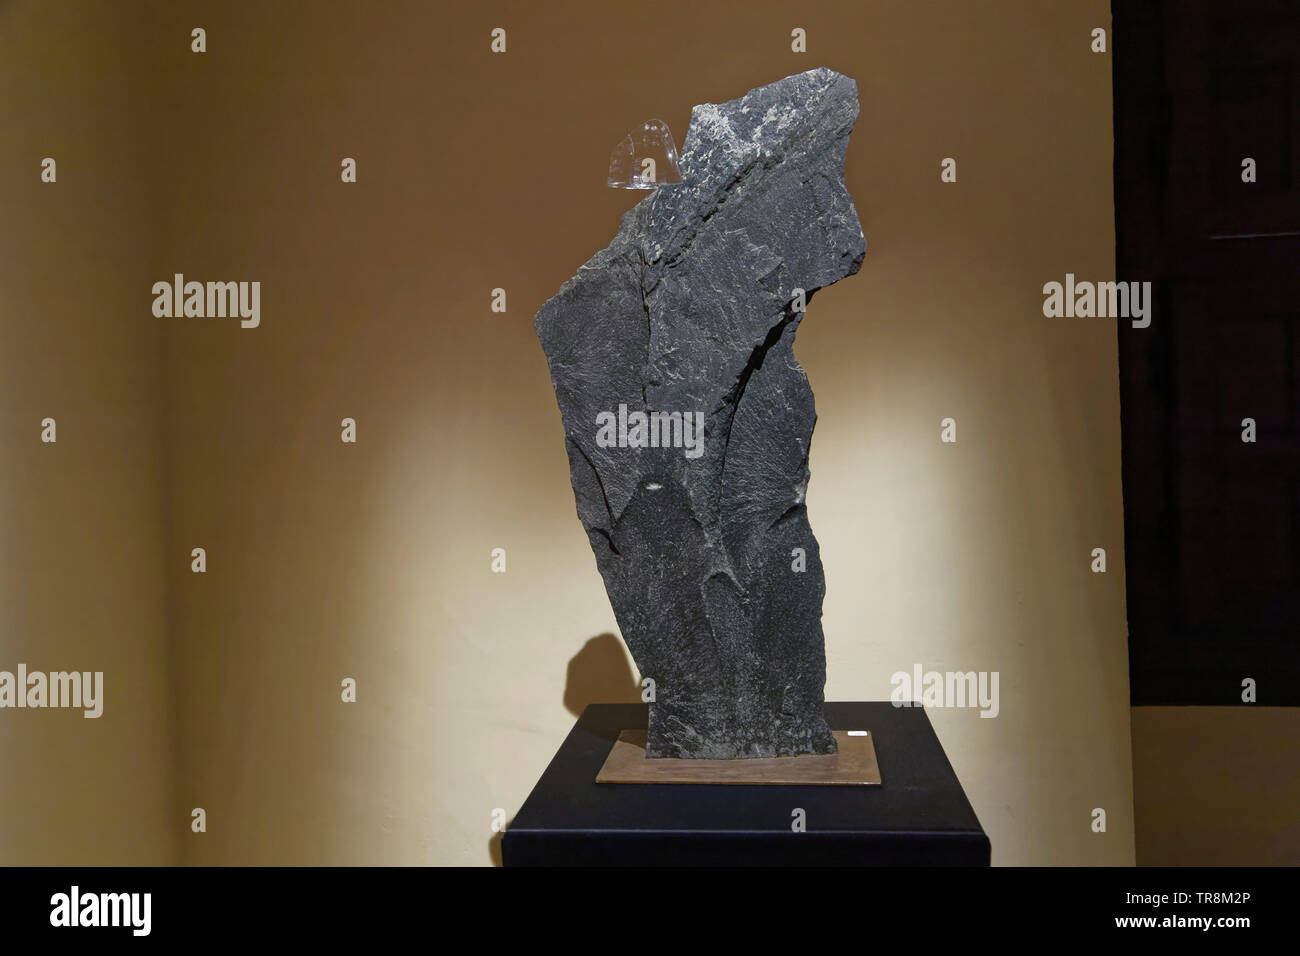 Tours, France.24th May,2019.Artwork of Gerard Fournier at Exhibition Re-naissance(s) of the Capazza Gallery.©:Veronique Phitoussi/Alamy Stock Photo Stock Photo